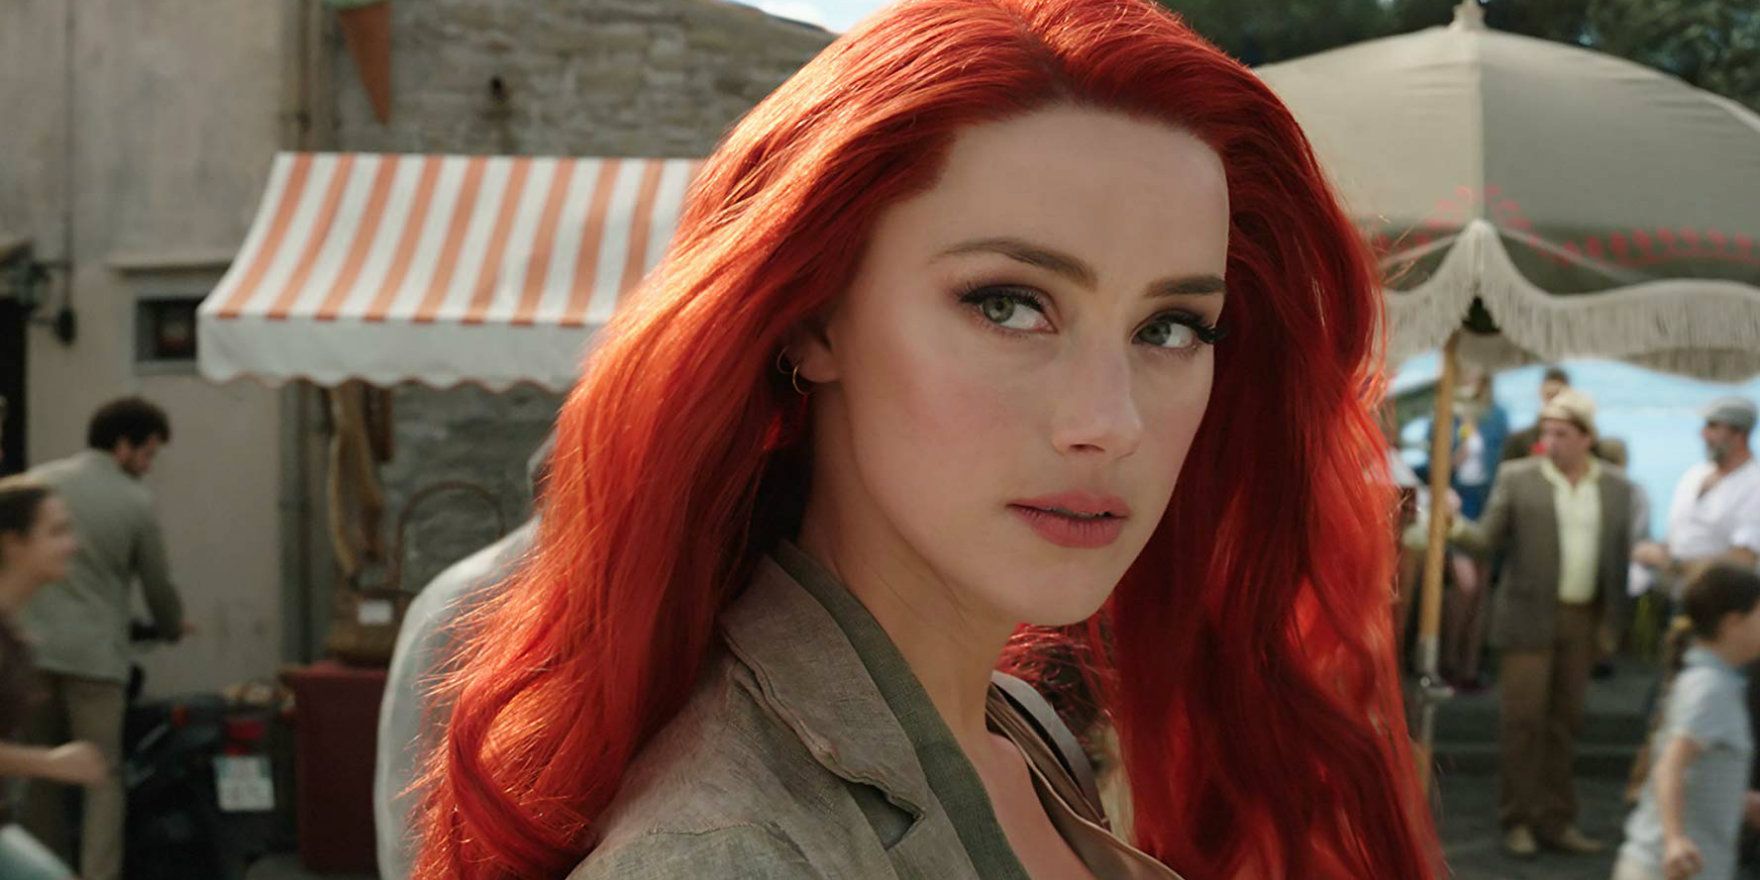 Mera turning to her right in Aquaman